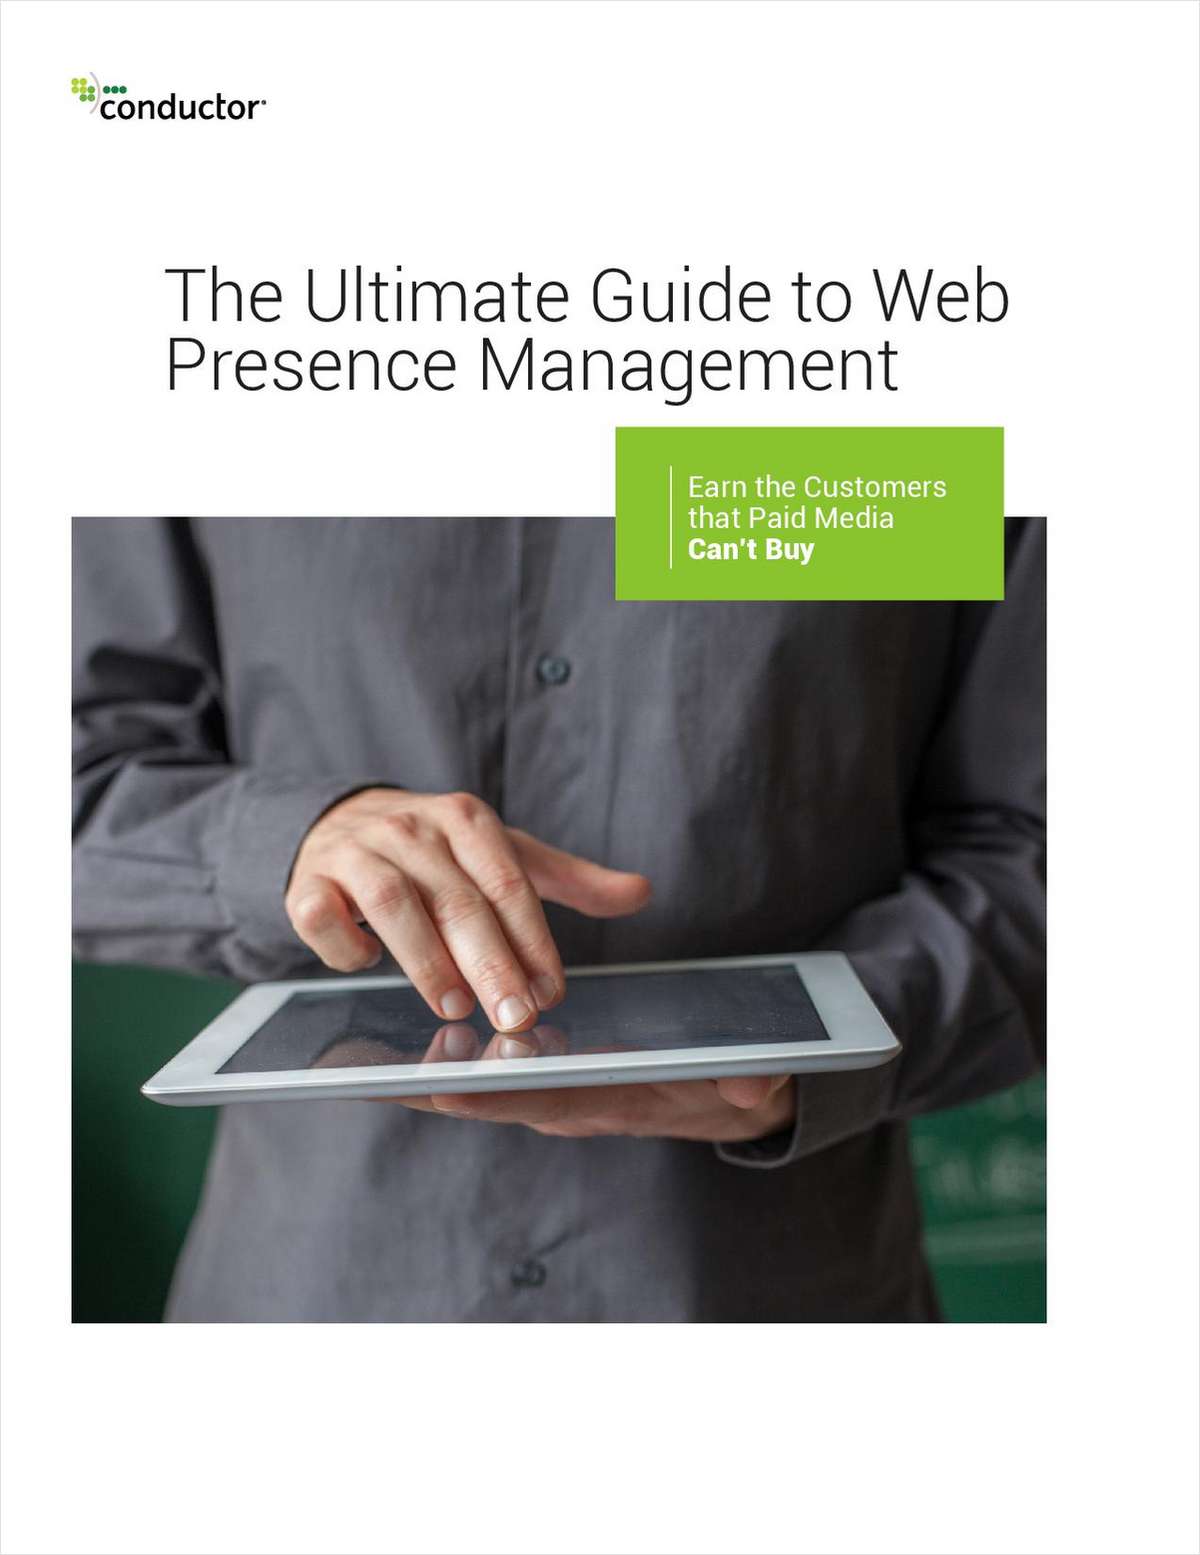 The Ultimate Guide to Web Presence Management